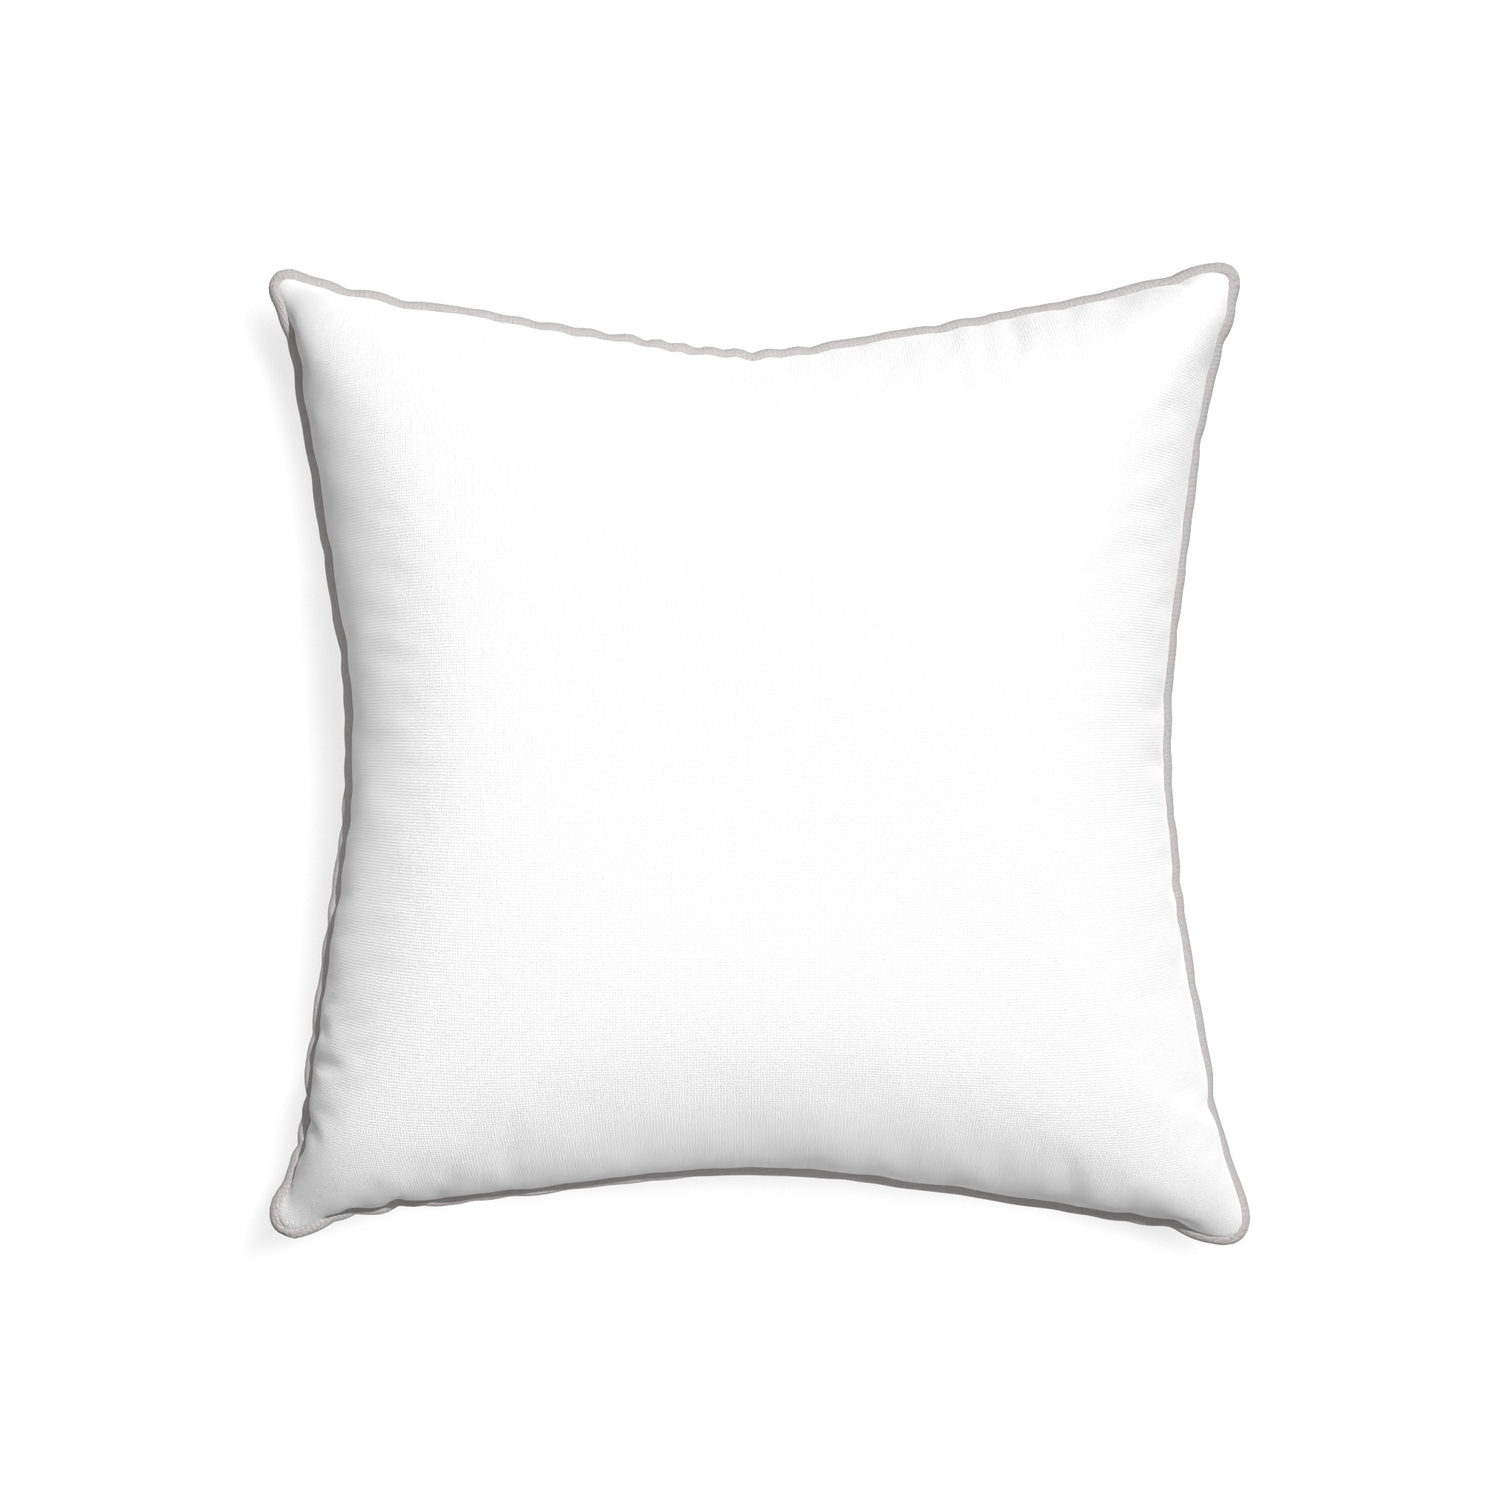 22-square snow custom white cottonpillow with pebble piping on white background